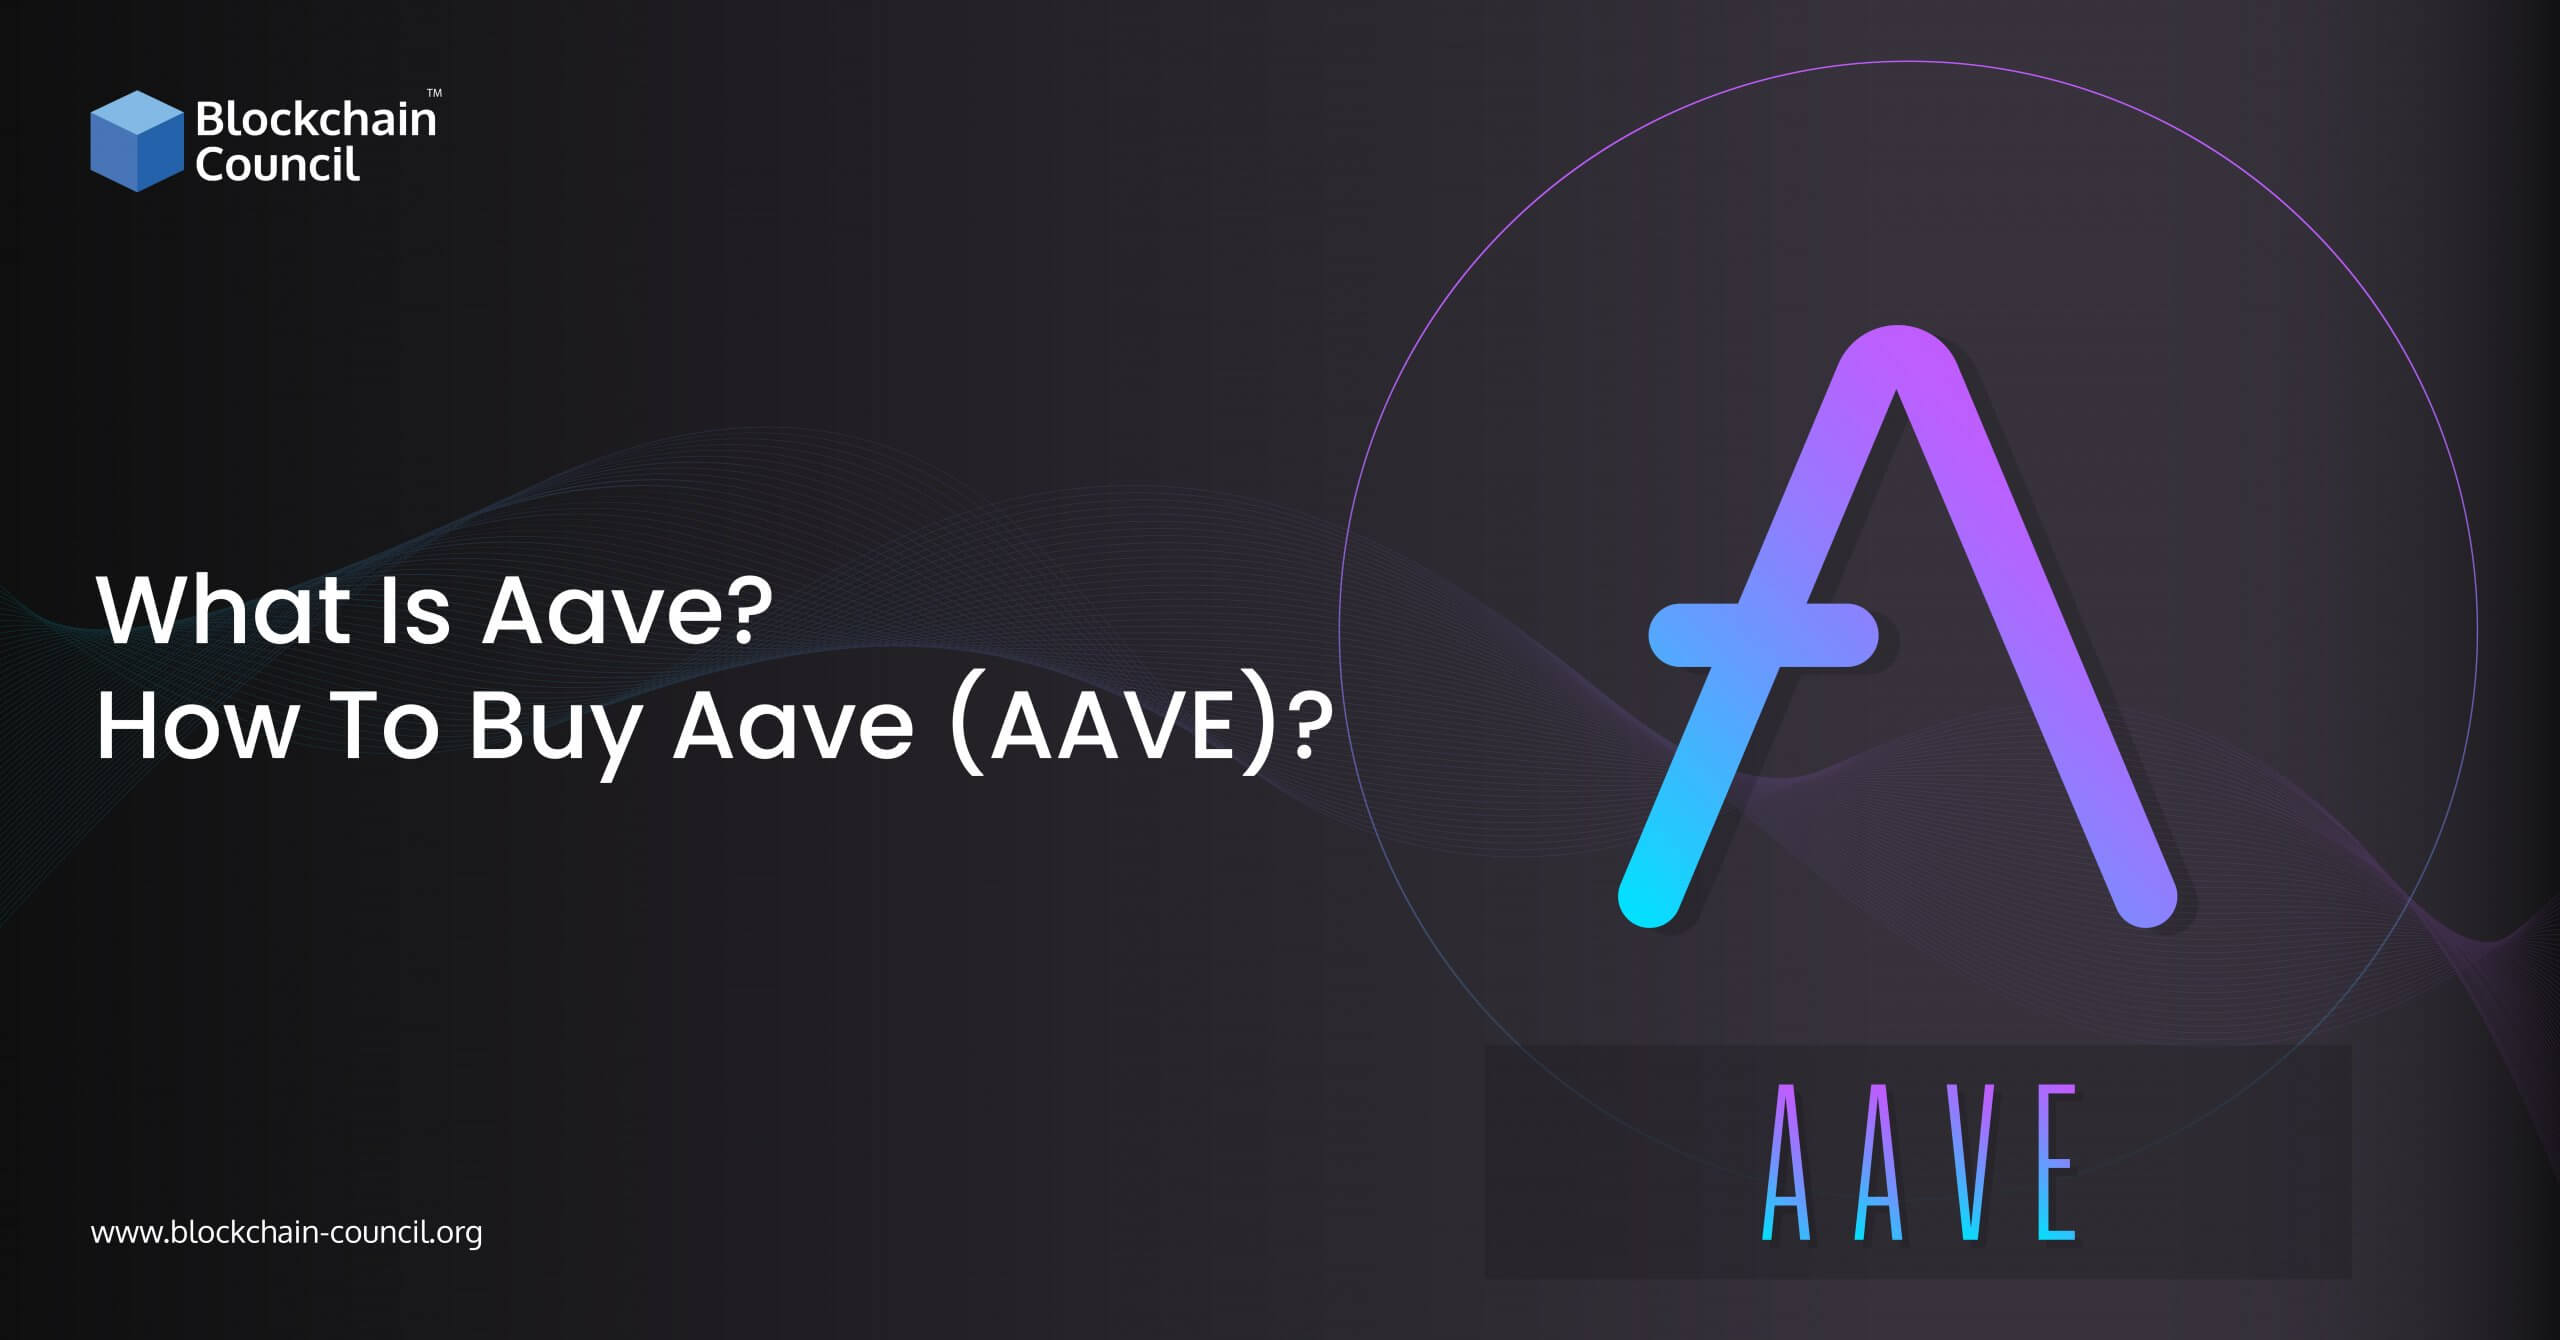 What Is Aave? How To Buy Aave (AAVE)?